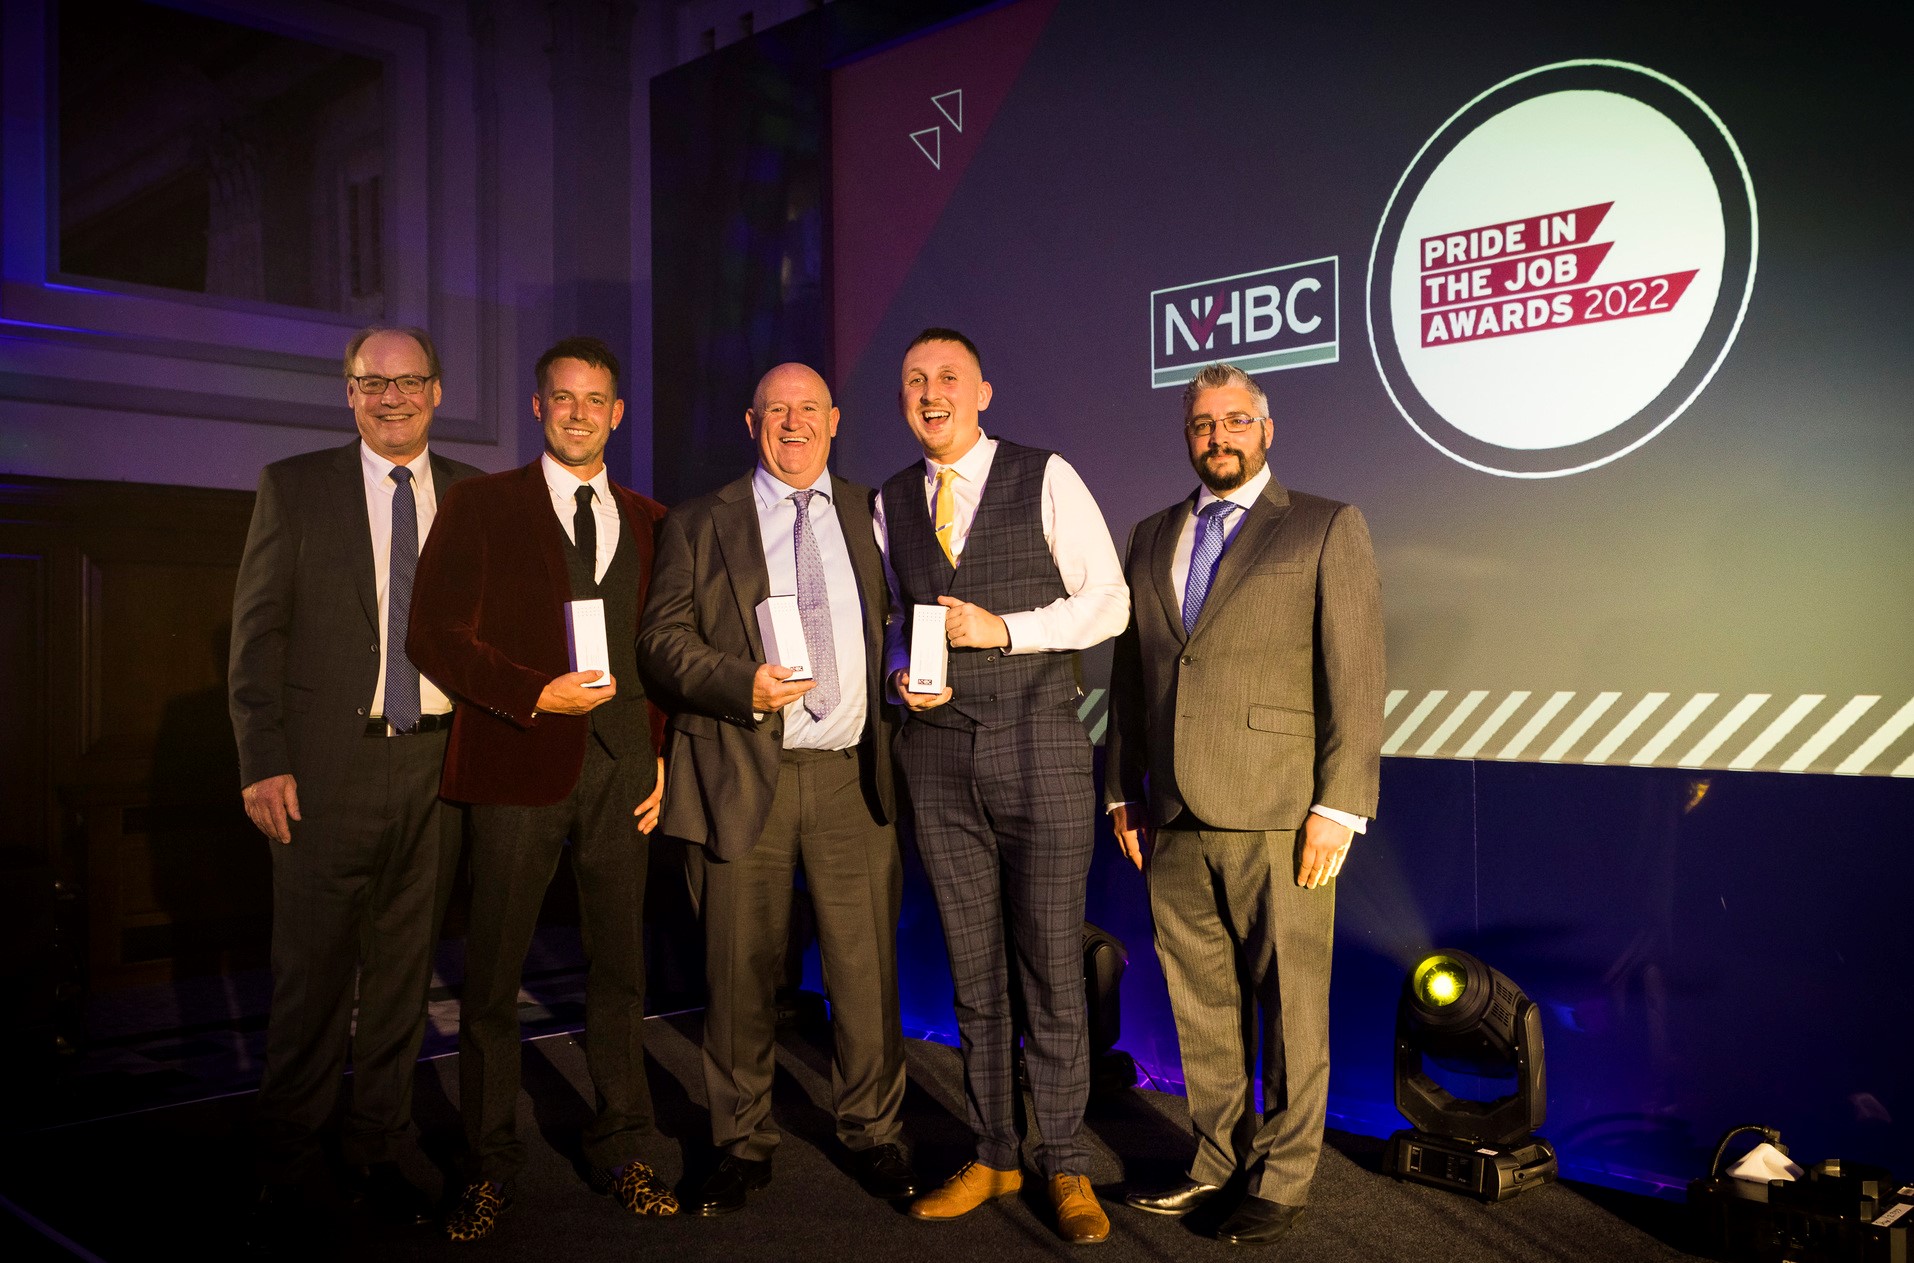 the north west regional winners of nhbc's pride in the job award smiling at the camera